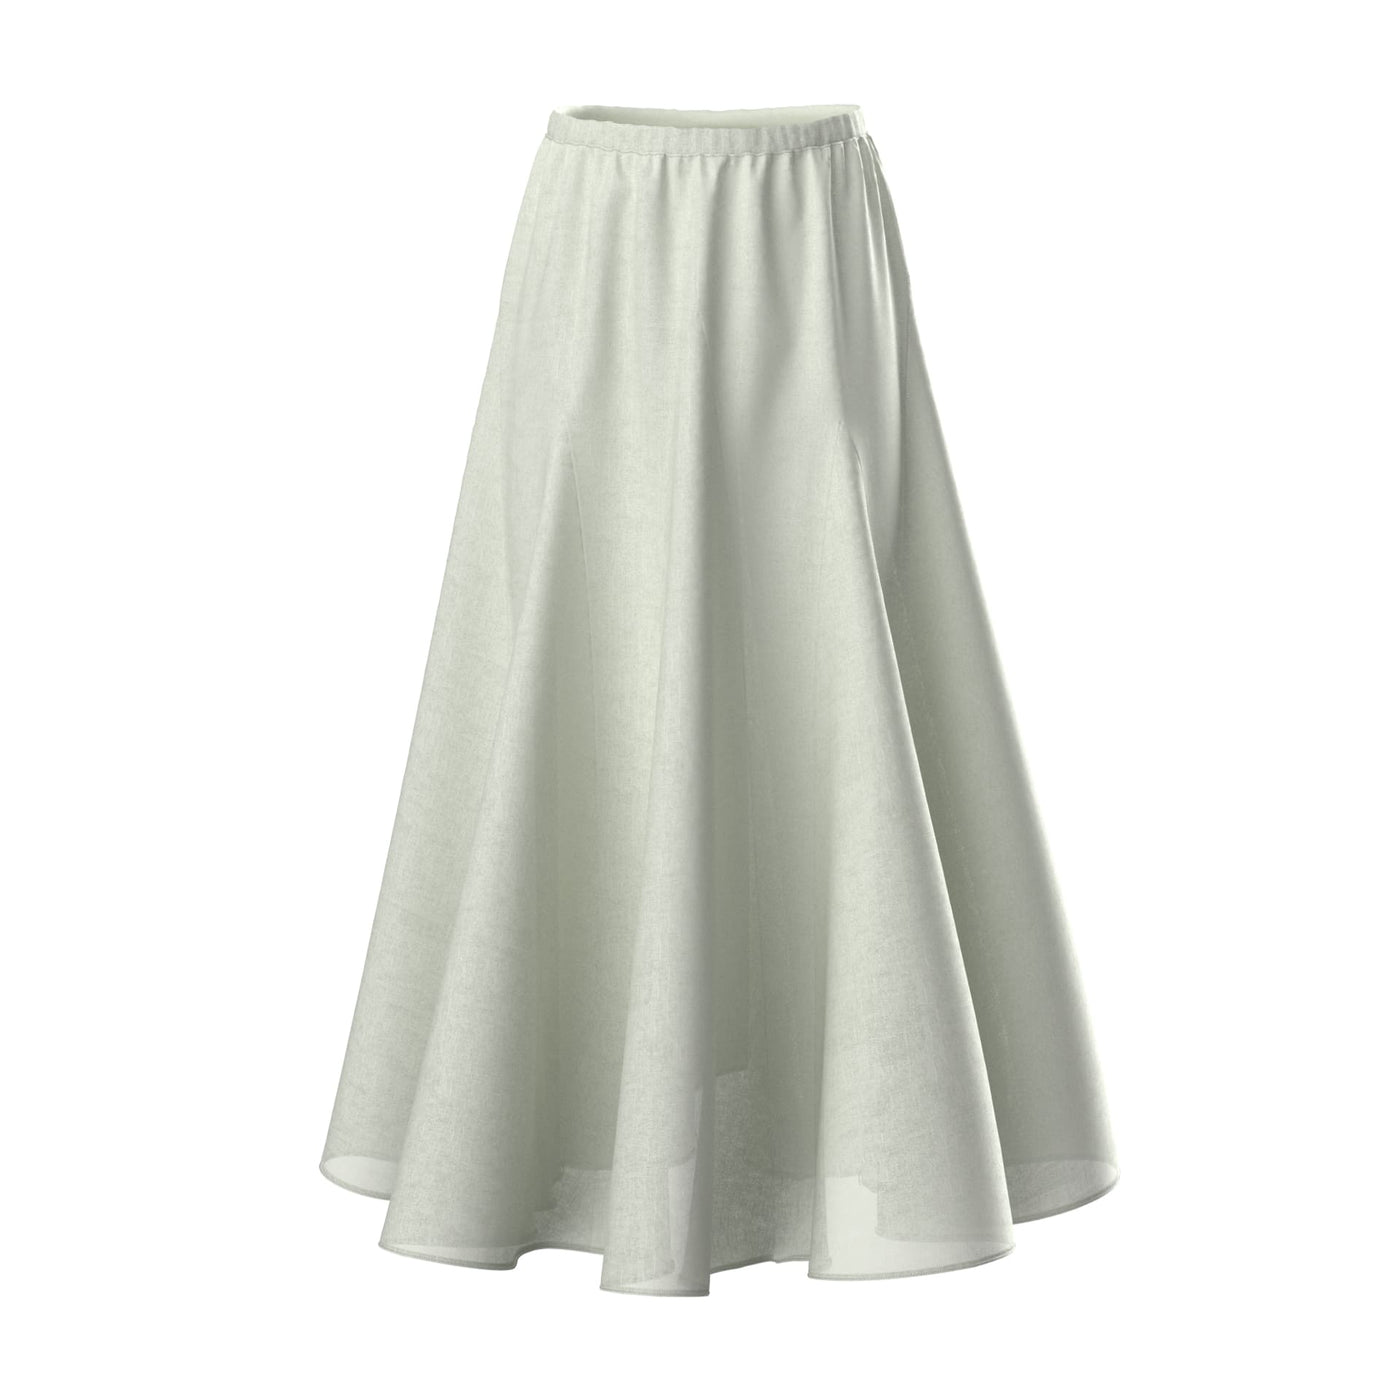 Lilly Pilly Collection 100% organic linen Stella Skirt in Tea, shown as a 3D model front view